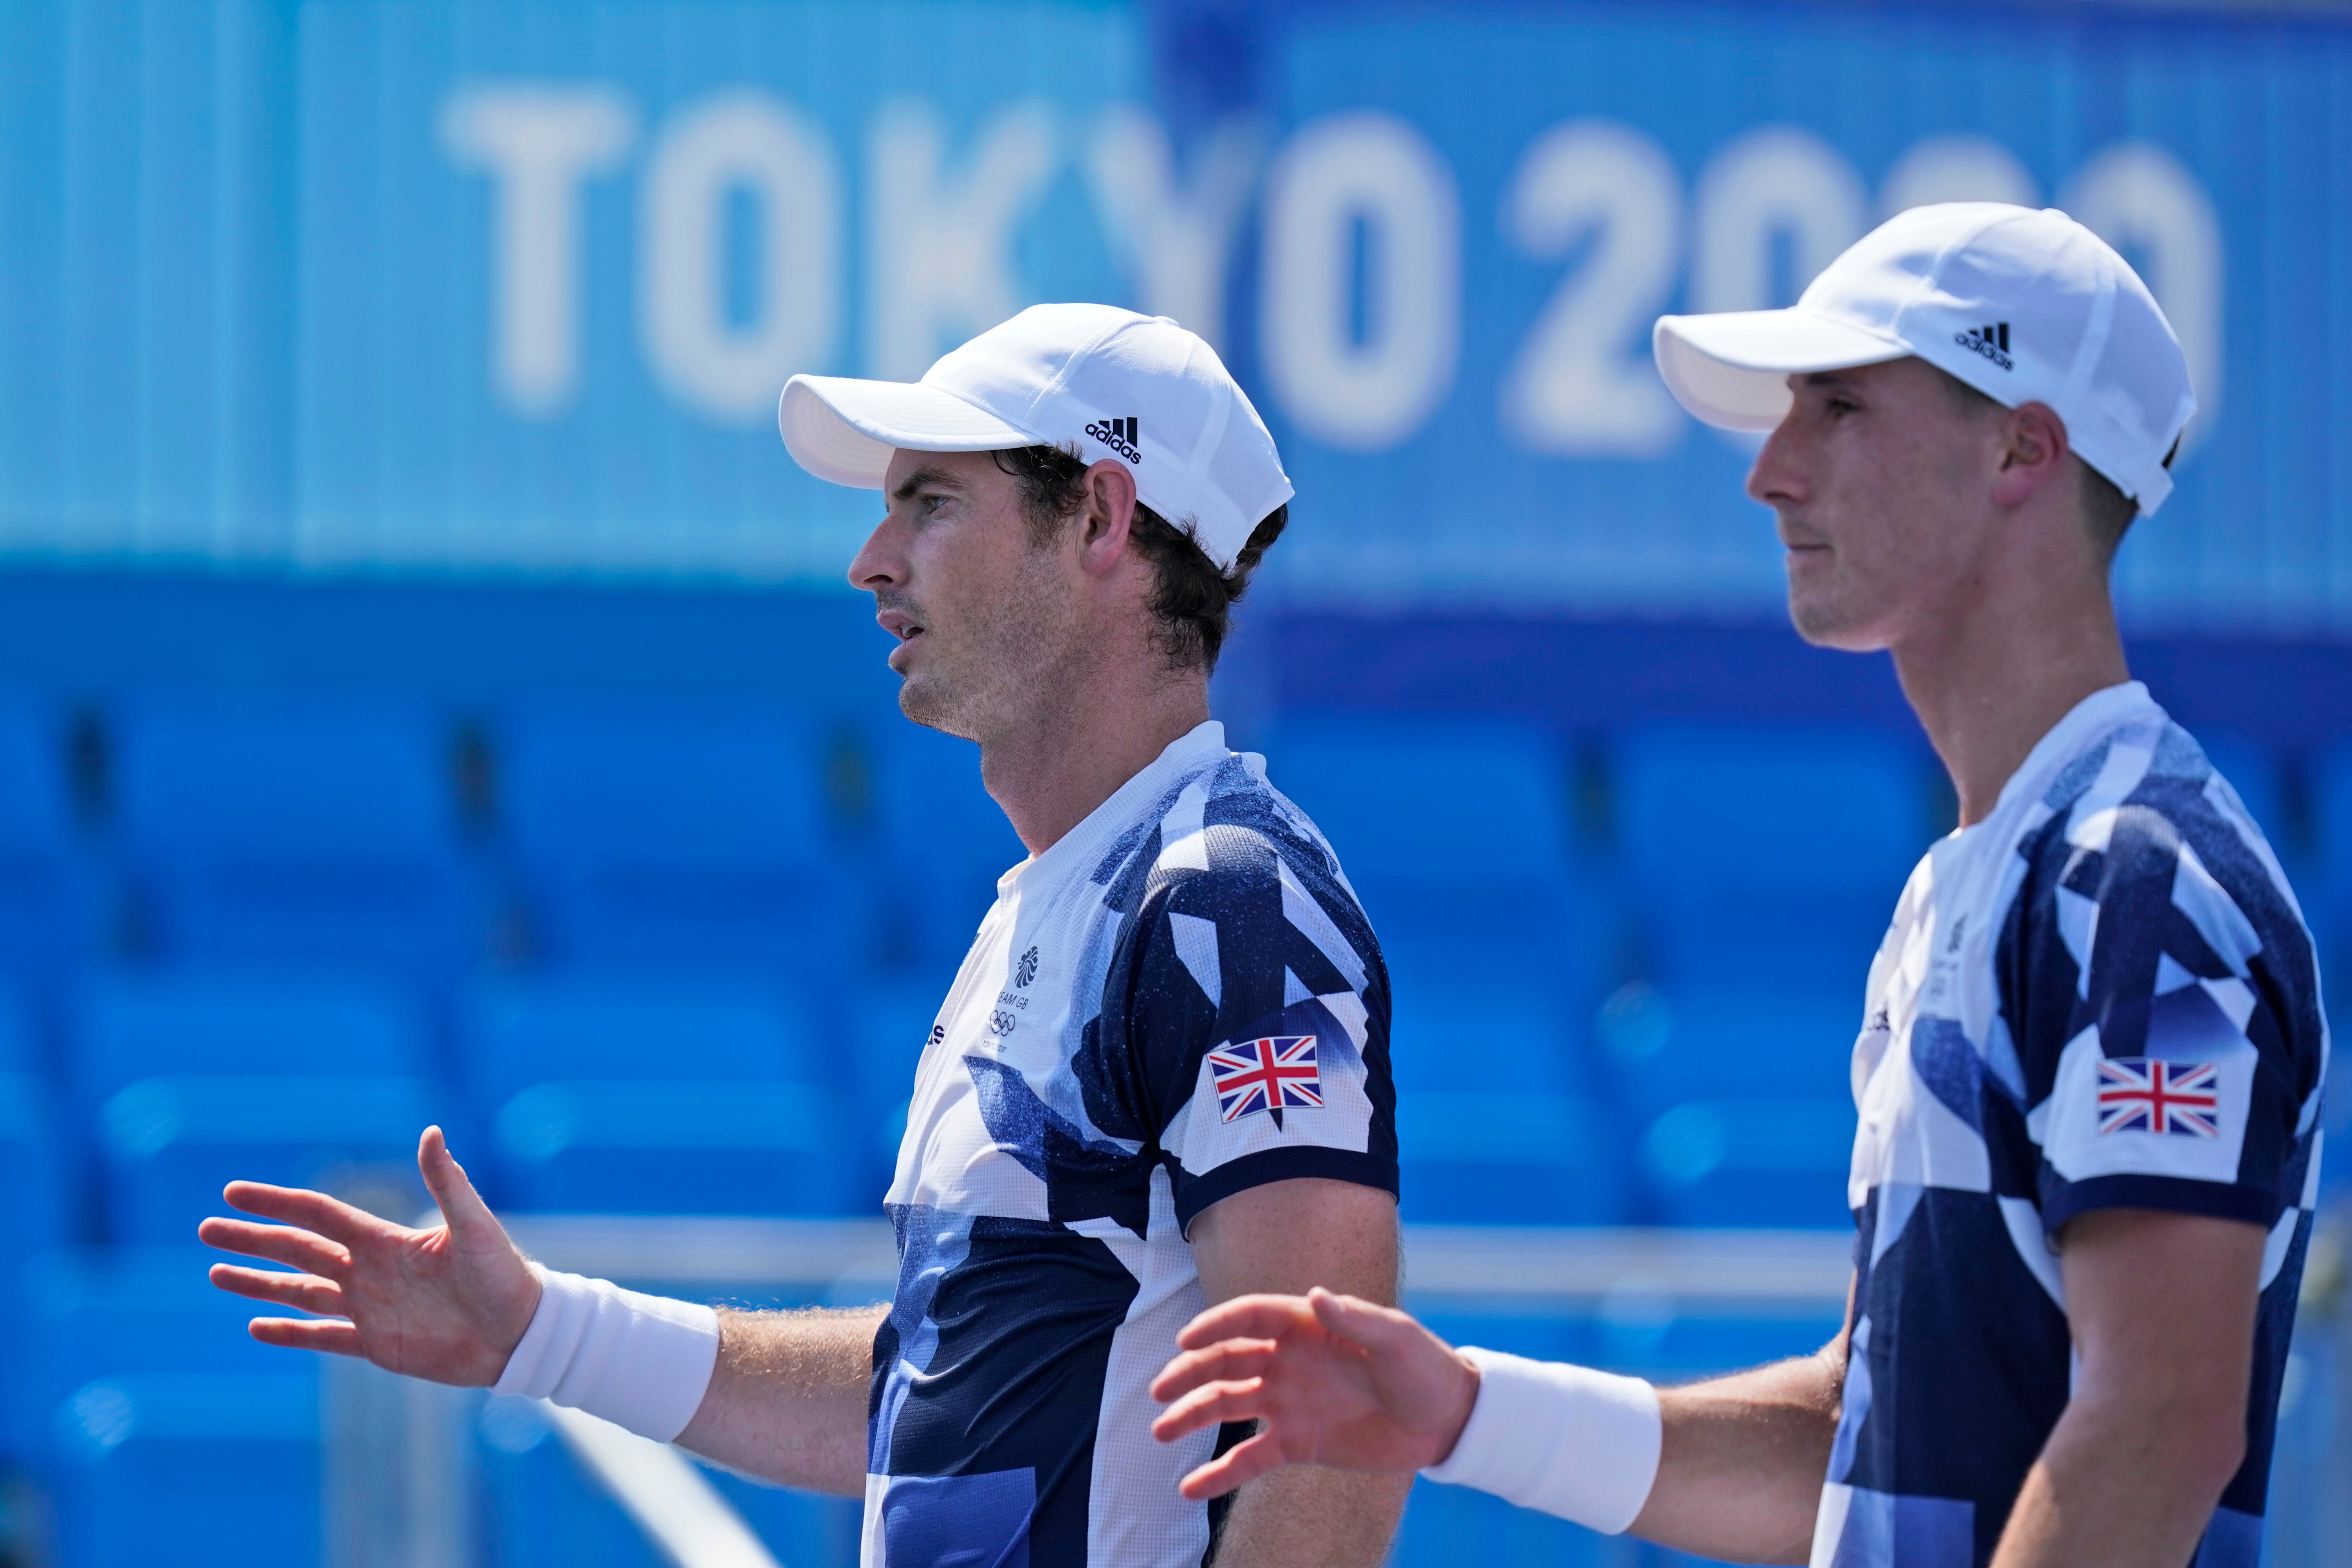 The British doubles team of Joe Salisbury, right, and Andy Murray, second from right, greet the French doubles team after defeating them during the first round of the tennis competition at the 2020 Summer Olympics, Saturday, 24 July 2021, in Tokyo, Japan